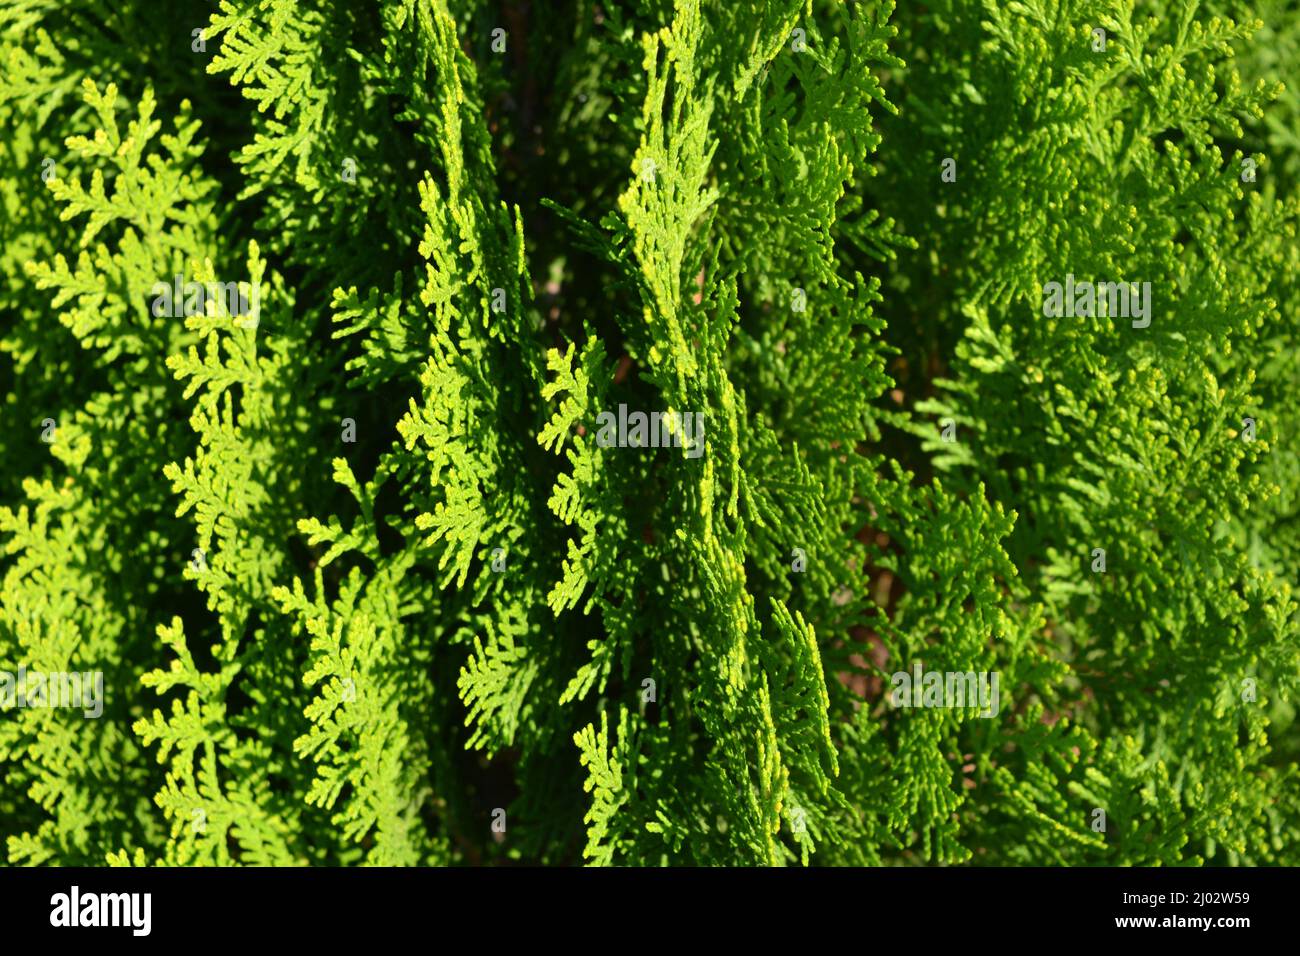 Beautiful bright green background, large thuja bushes, wide leaves and unusual branches. Stock Photo